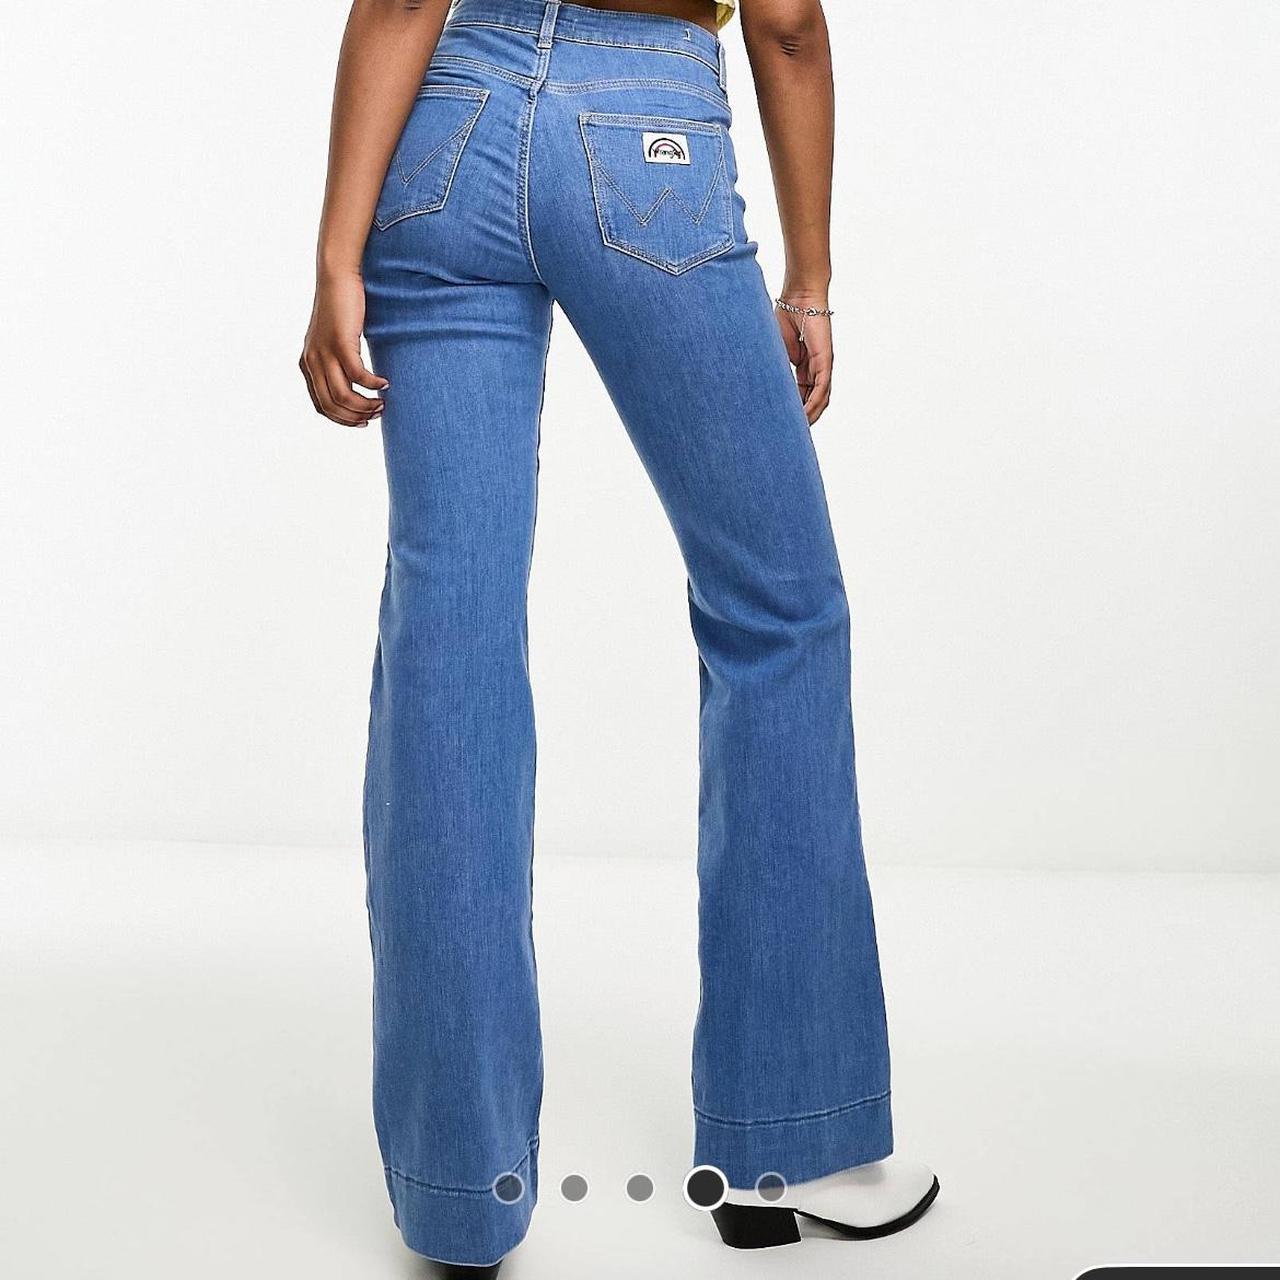 Wrangler retro 70s style flare jeans with high - Depop